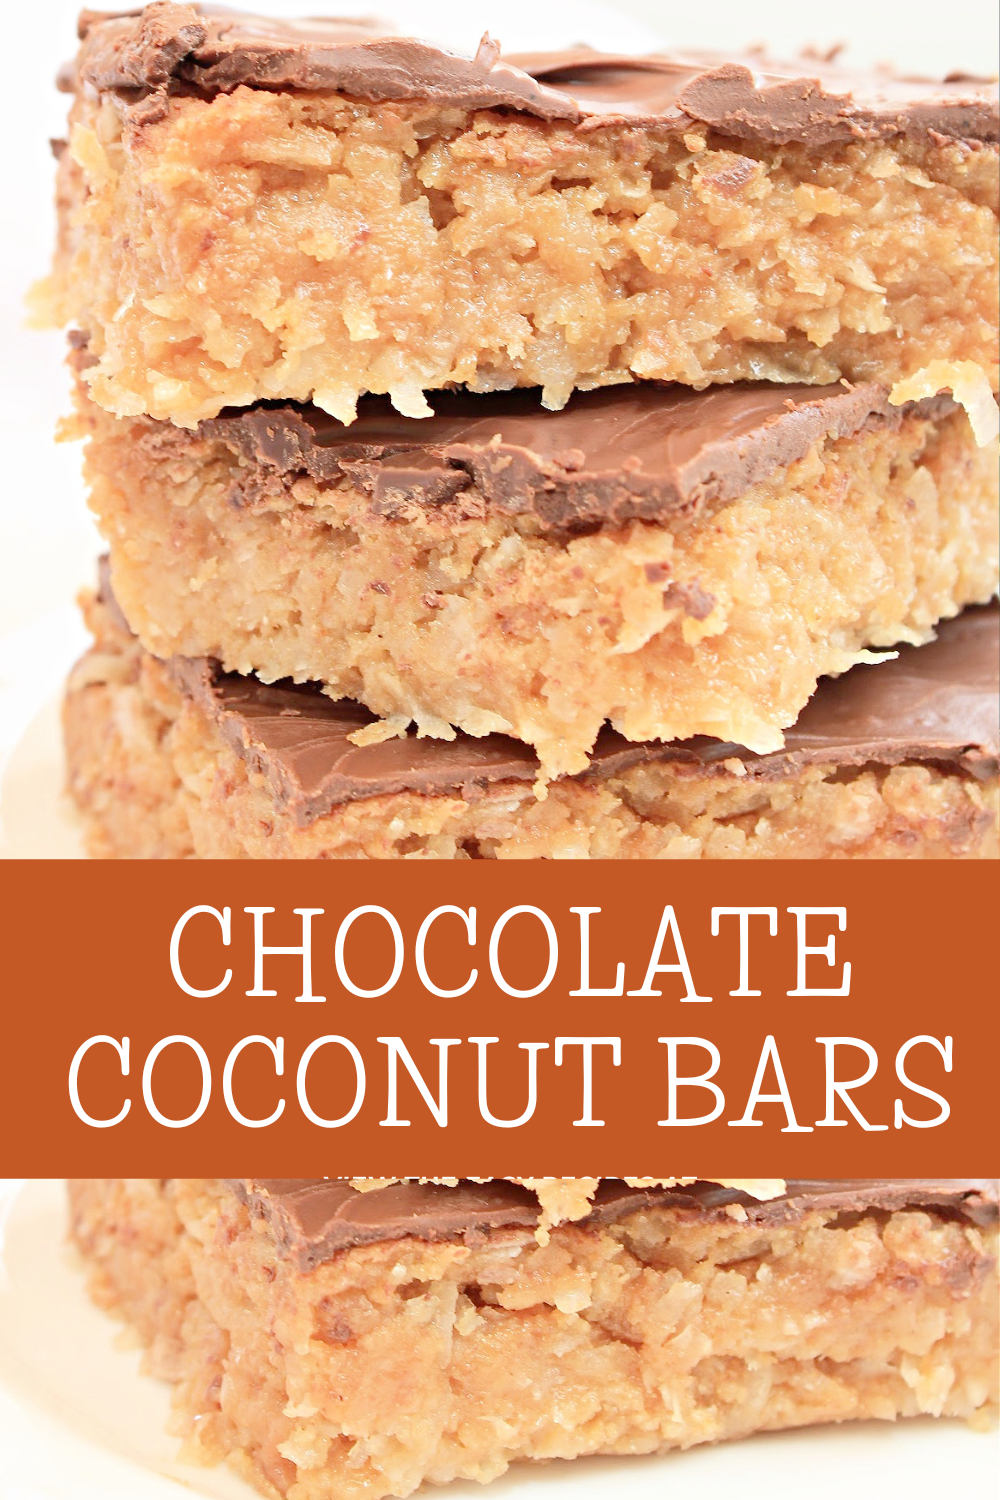 Chocolate Covered Coconut Bars ~ These rich and gooey bars will satisfy any sweet tooth candy craving! via @thiswifecooks